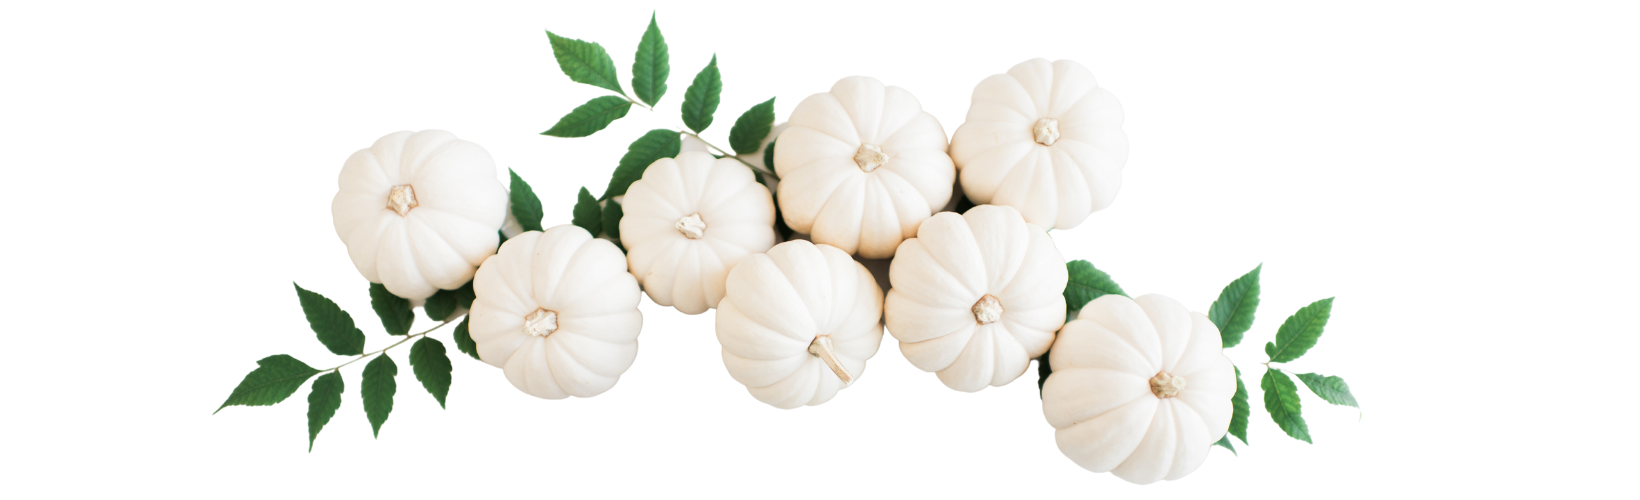 white pumpkin decor with green leaves